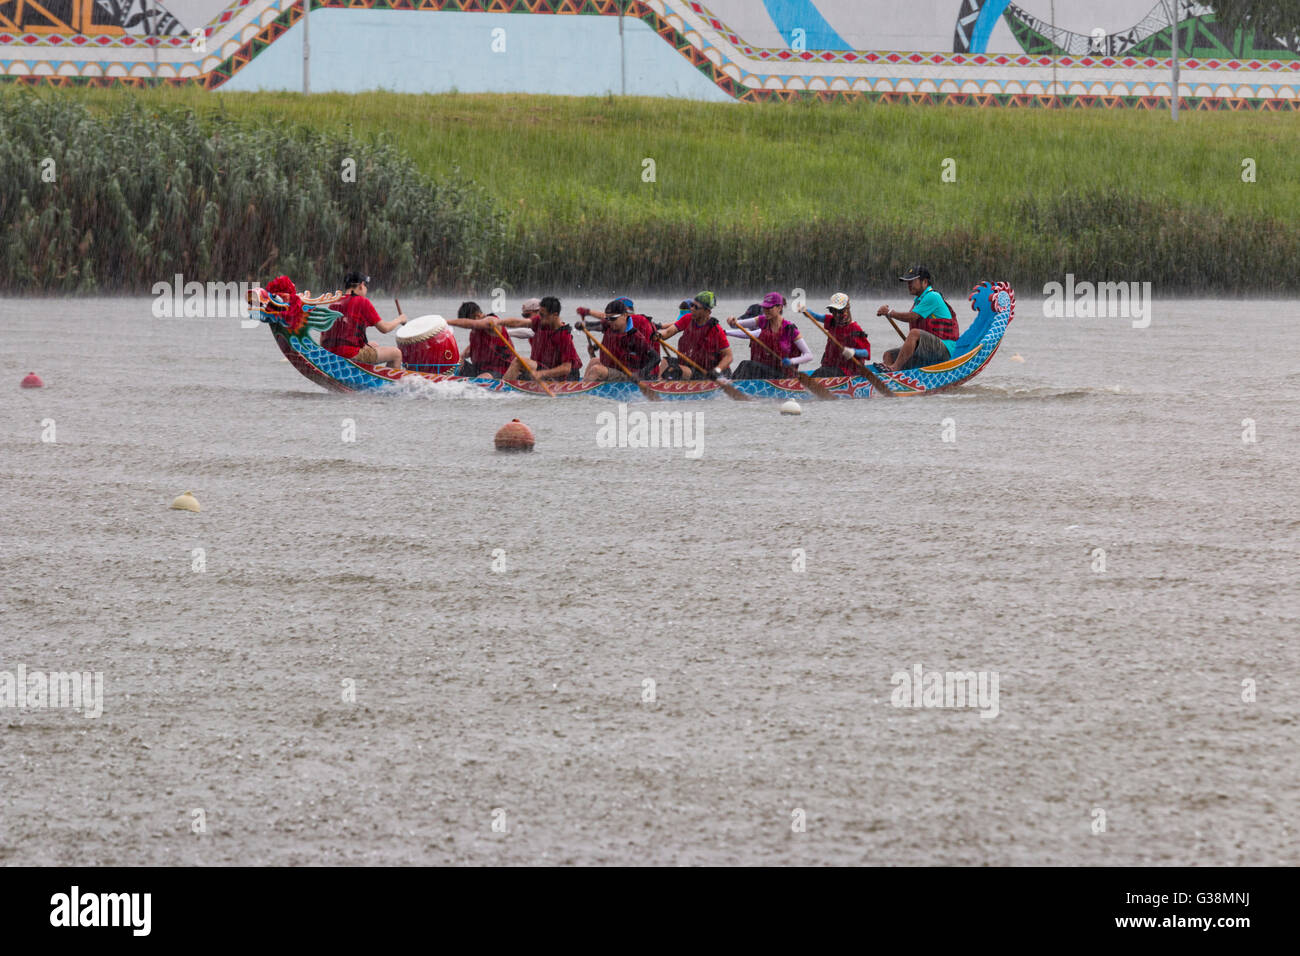 A drummer beats out the rhythm for his crew during the annual dragon boat race that took place in heavy rain on Duanwu Festival, better known as Dragon Boat Festival. Stock Photo